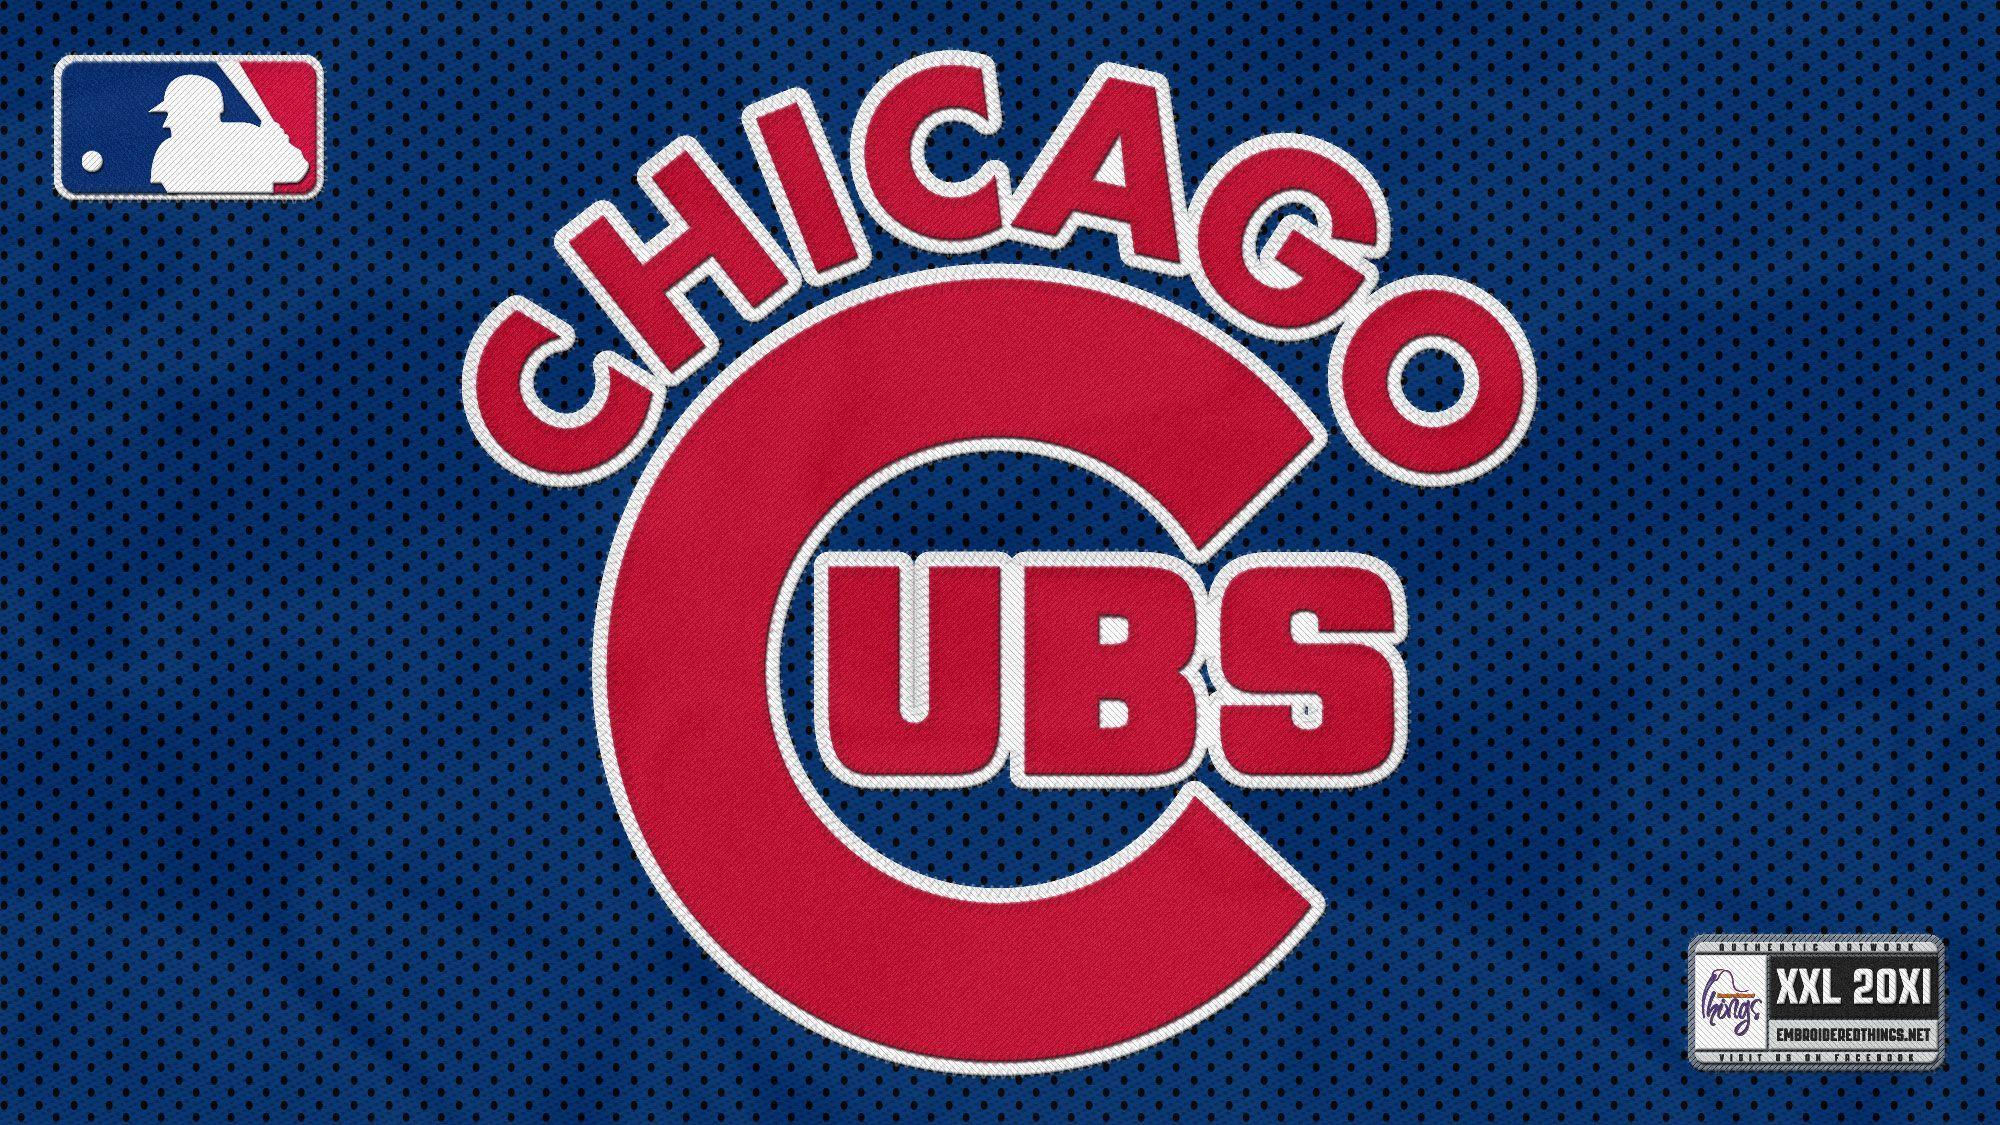 Chicago Cubs HD image. Chicago Cubs wallpaper